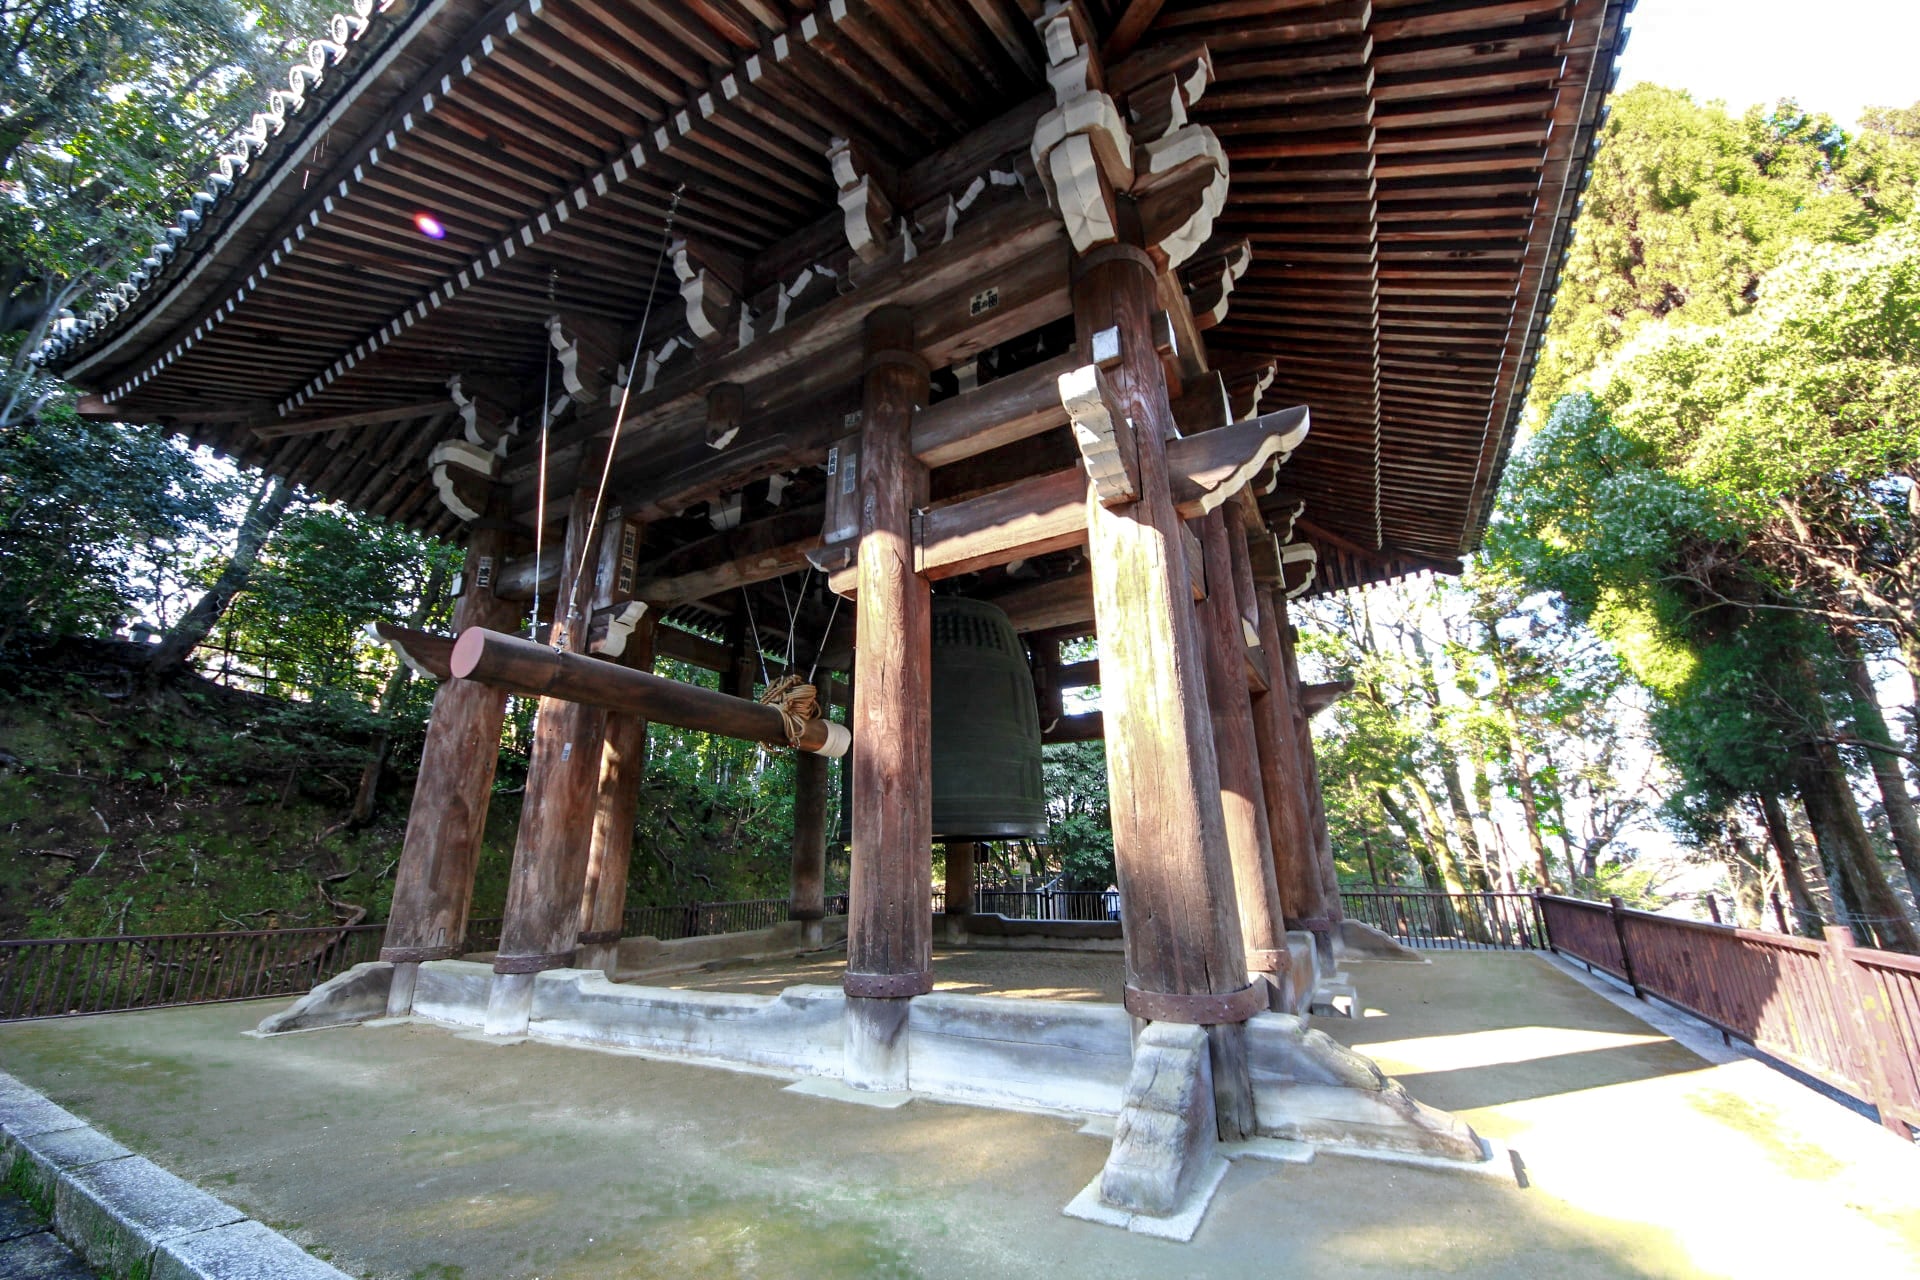 The bell that rings 108 times every New Years's eve at Chion-in Temple in Kyoto, Japan